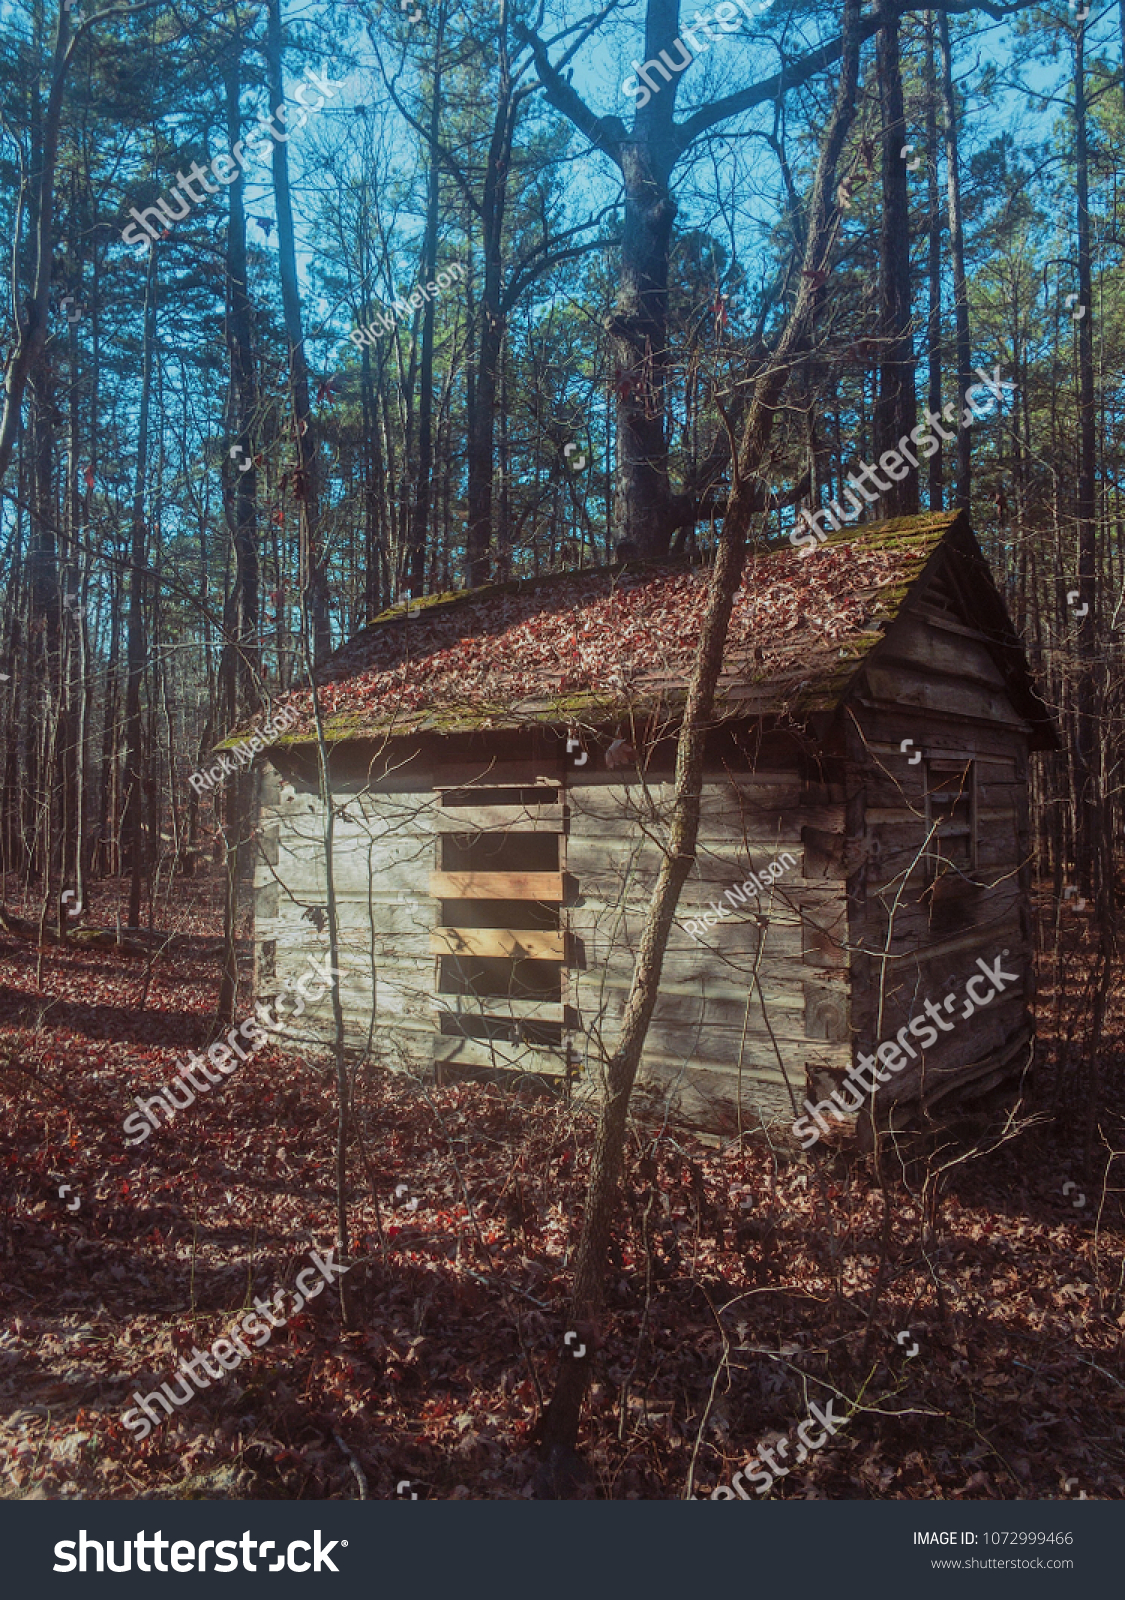 An old shack in the woods #1072999466